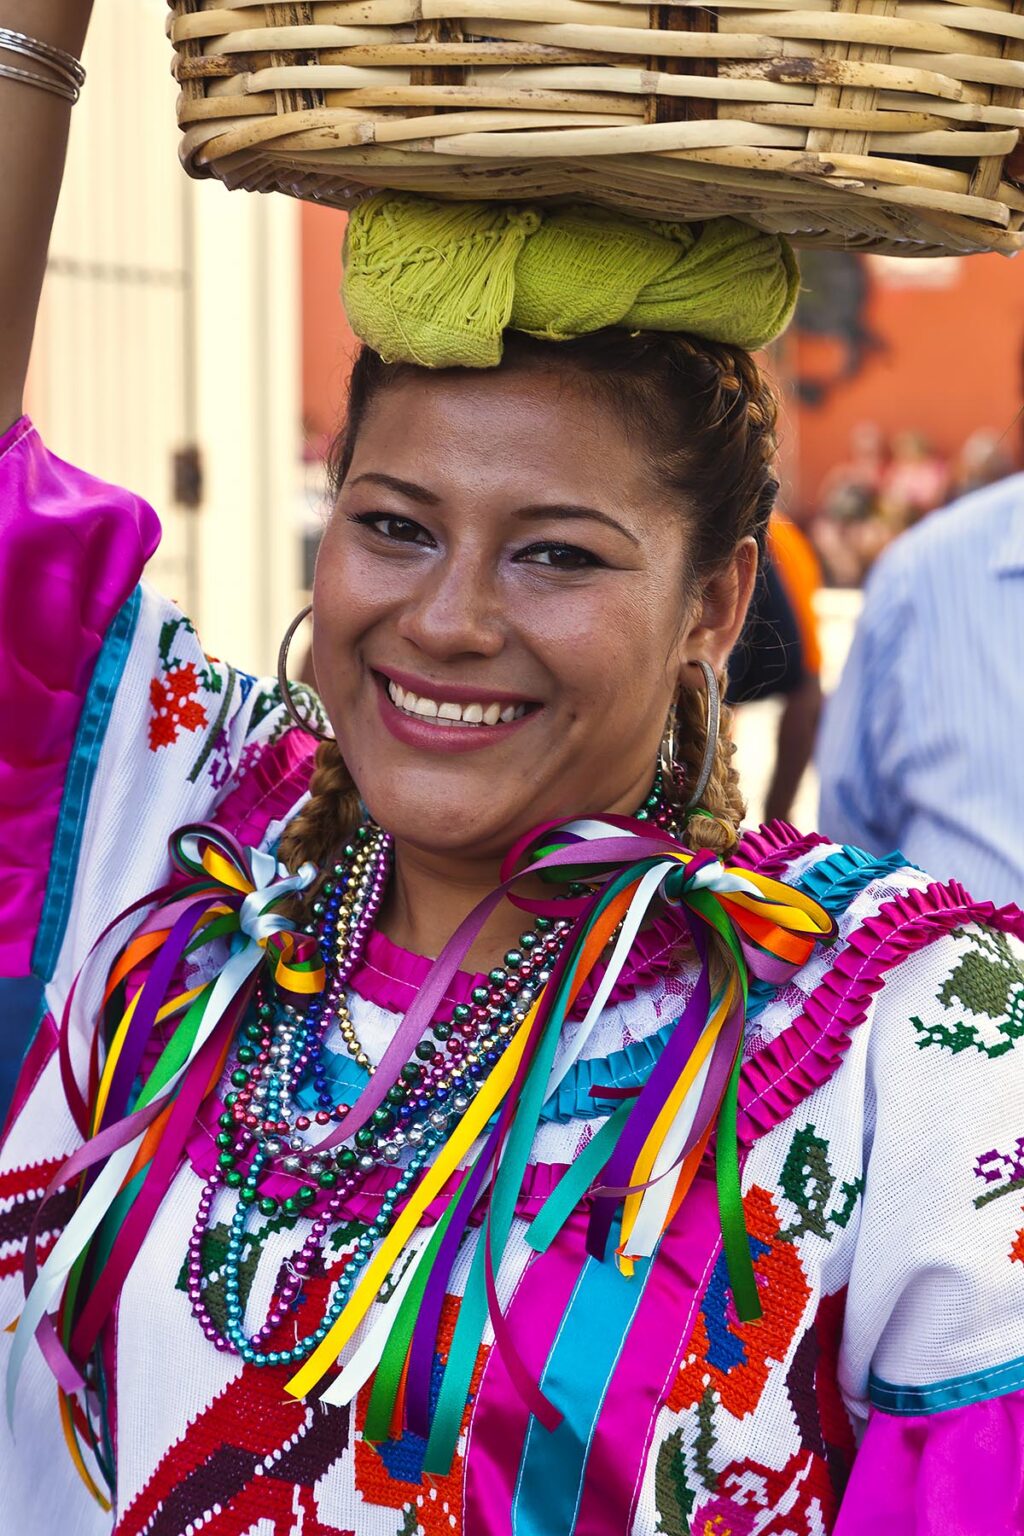 A traditionally dressed Mexican woman in a parade during the July GUELAGUETZA FESTIVAL  - OAXACA, MEXICO